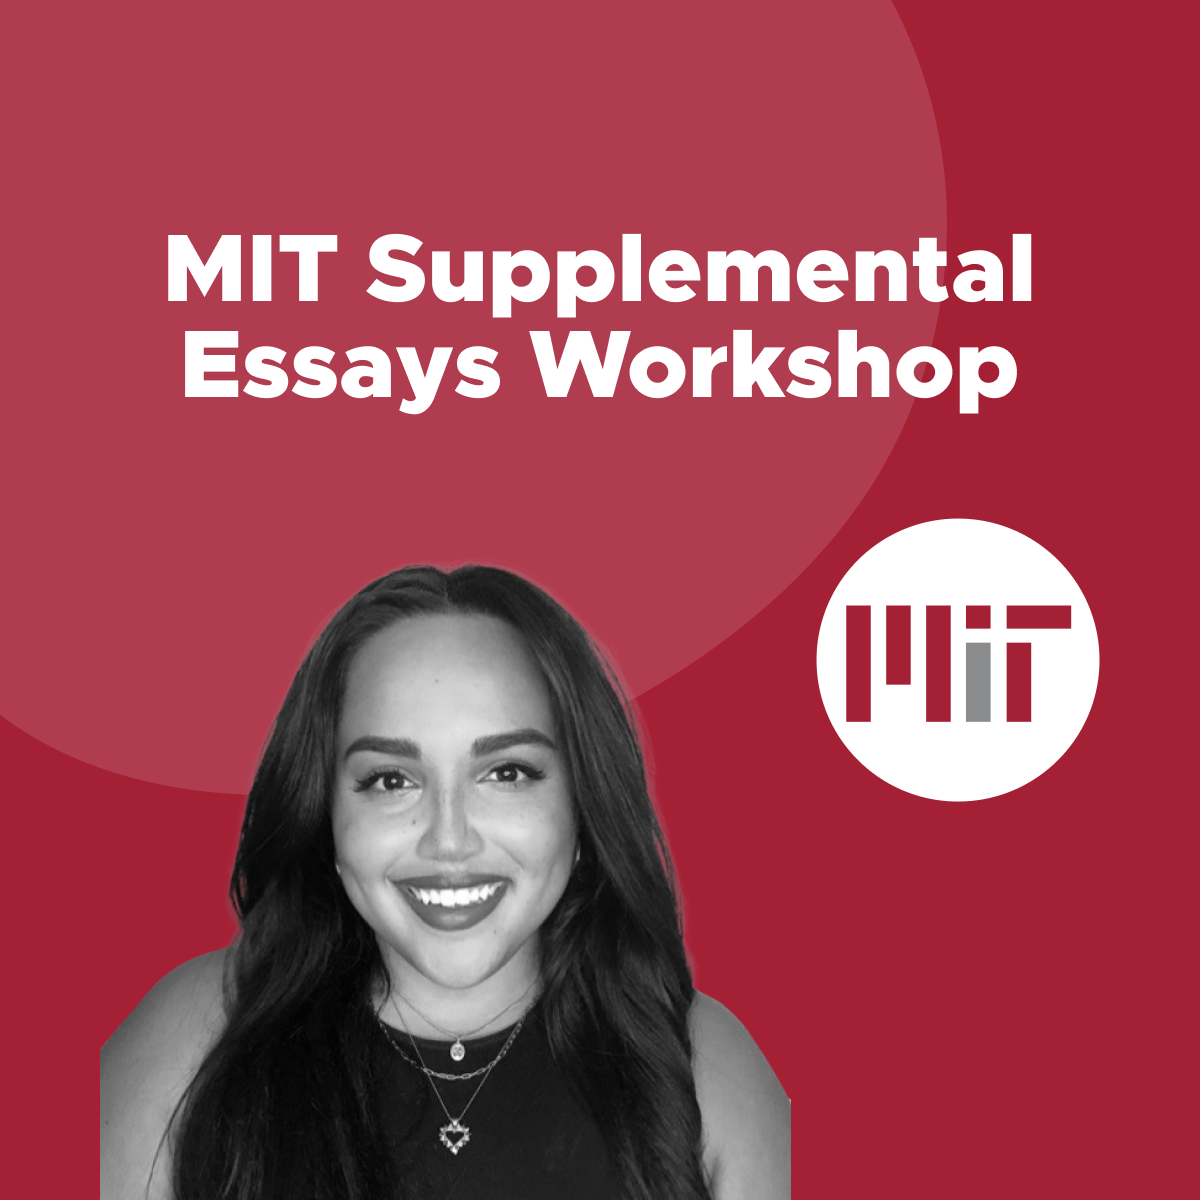 how many supplemental essays for mit